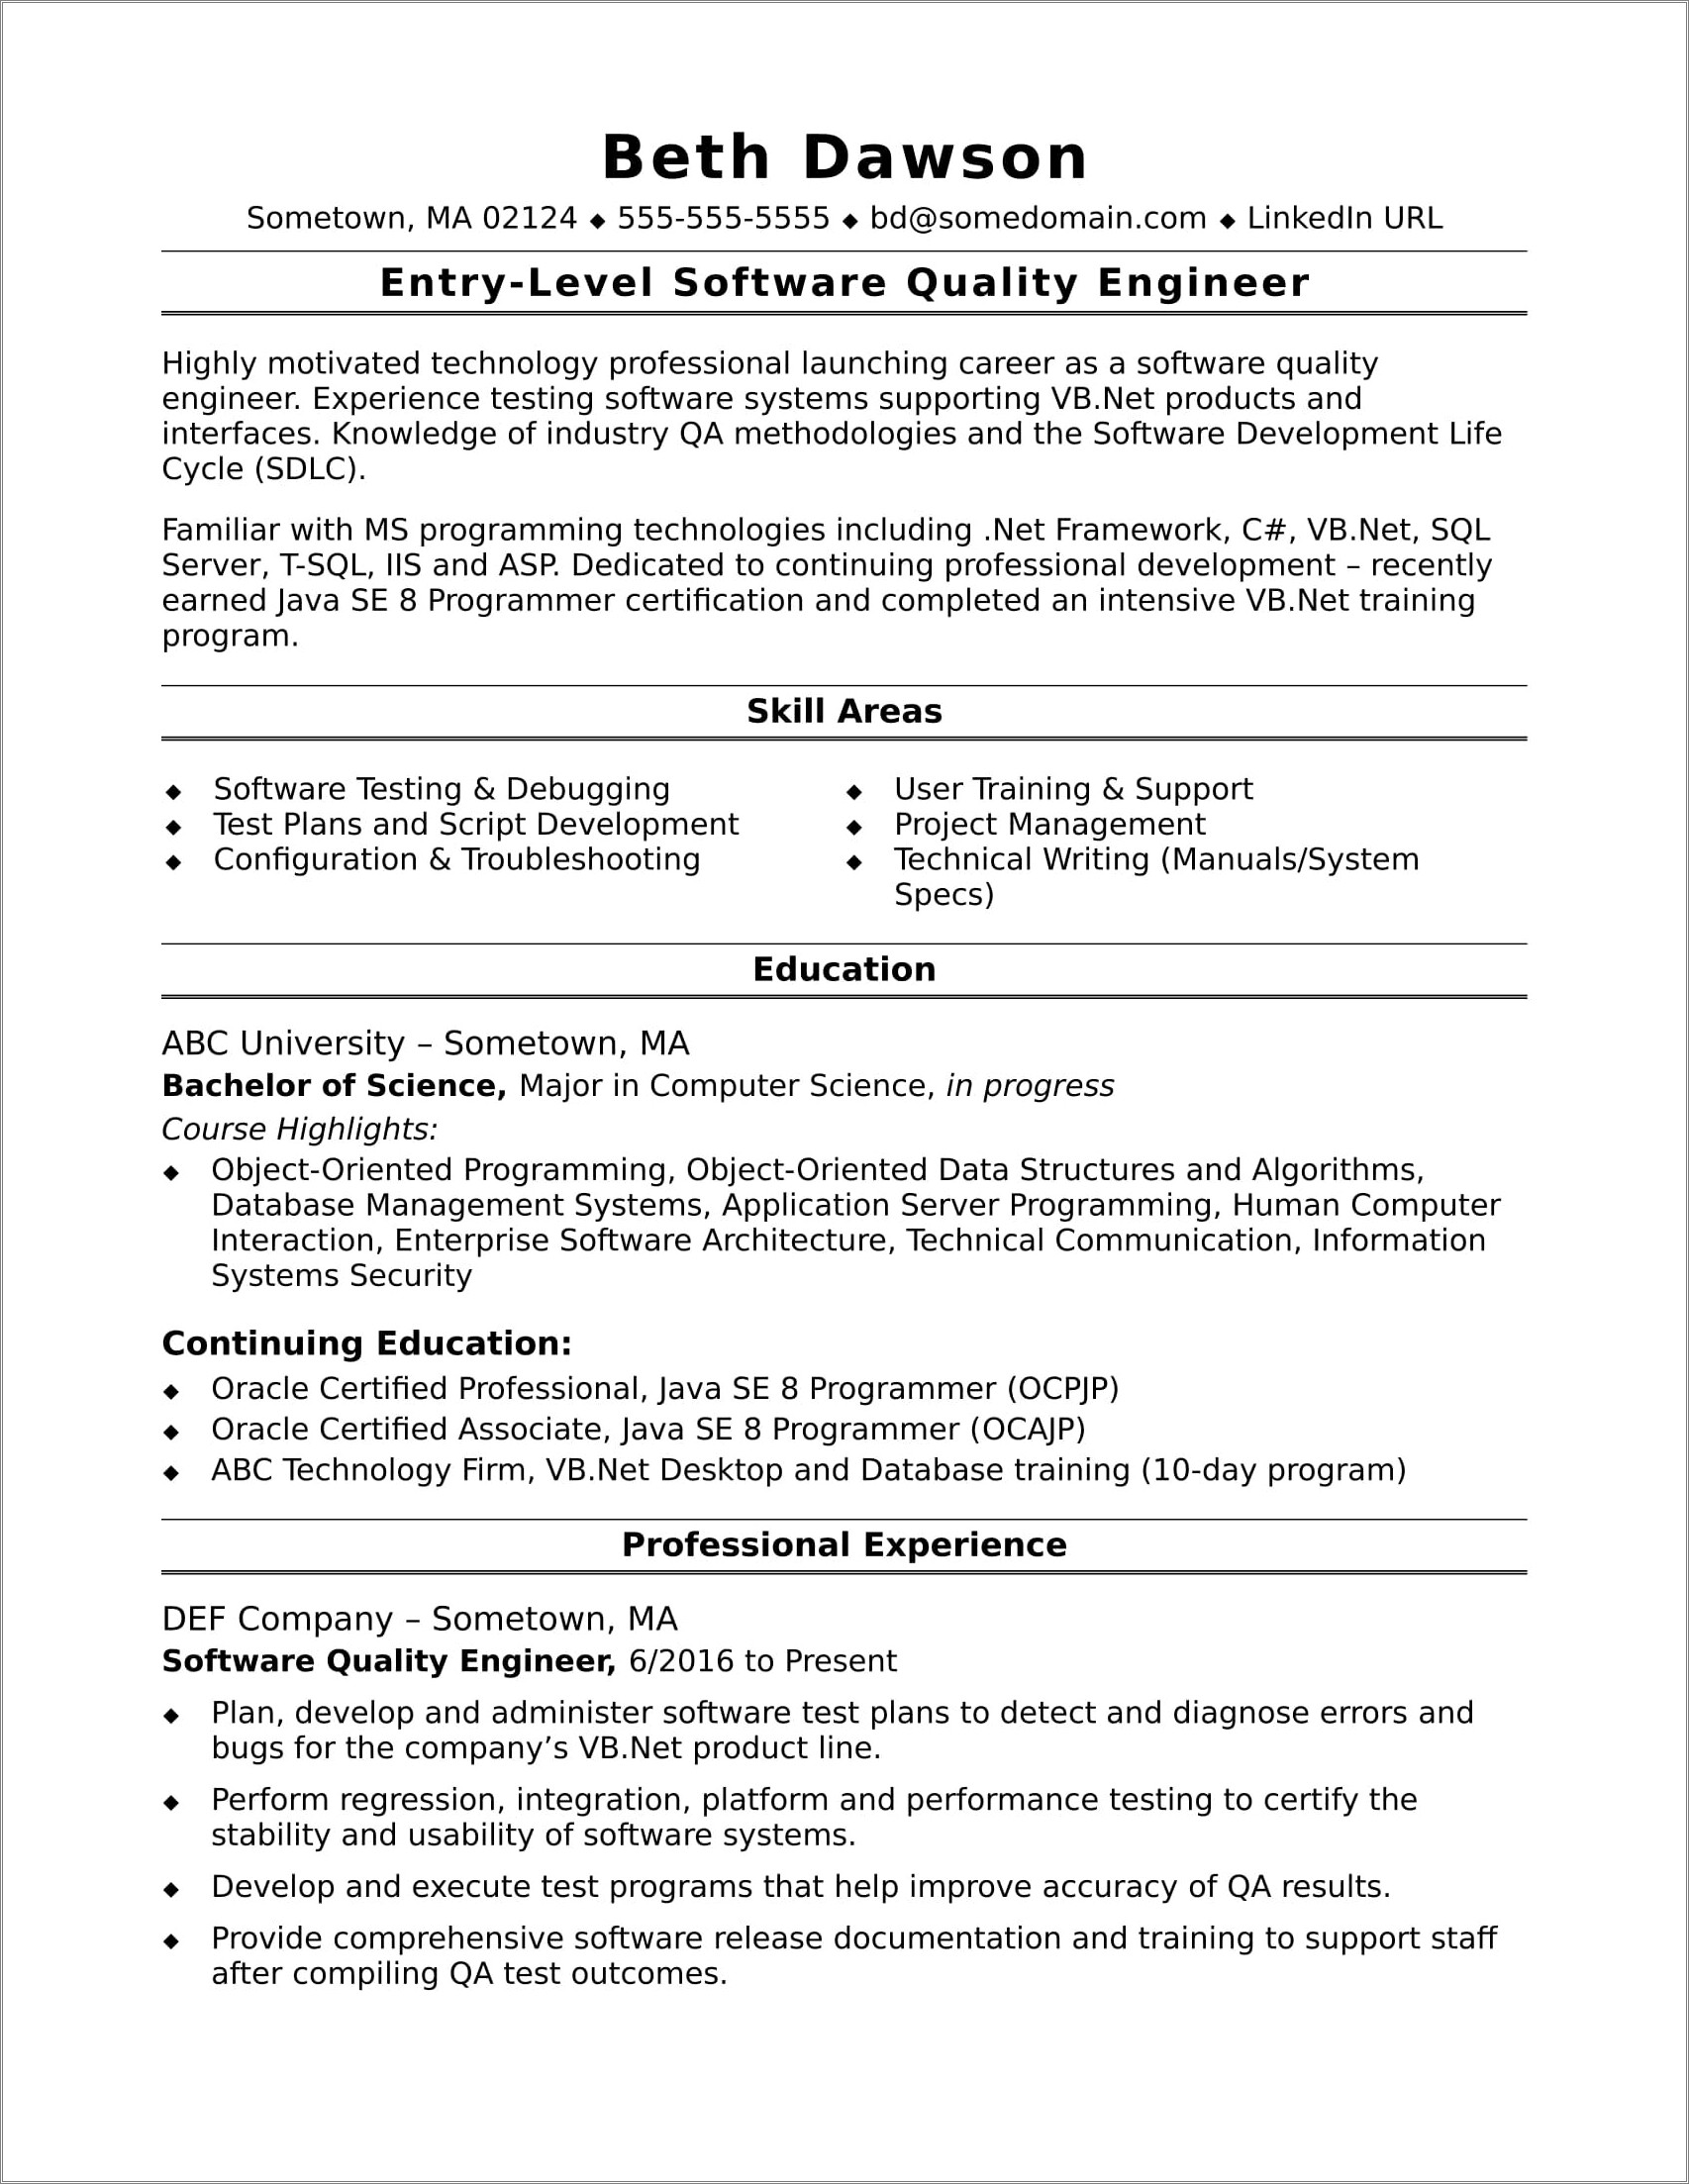 Entry Level Programmer With Associates Resume Examples